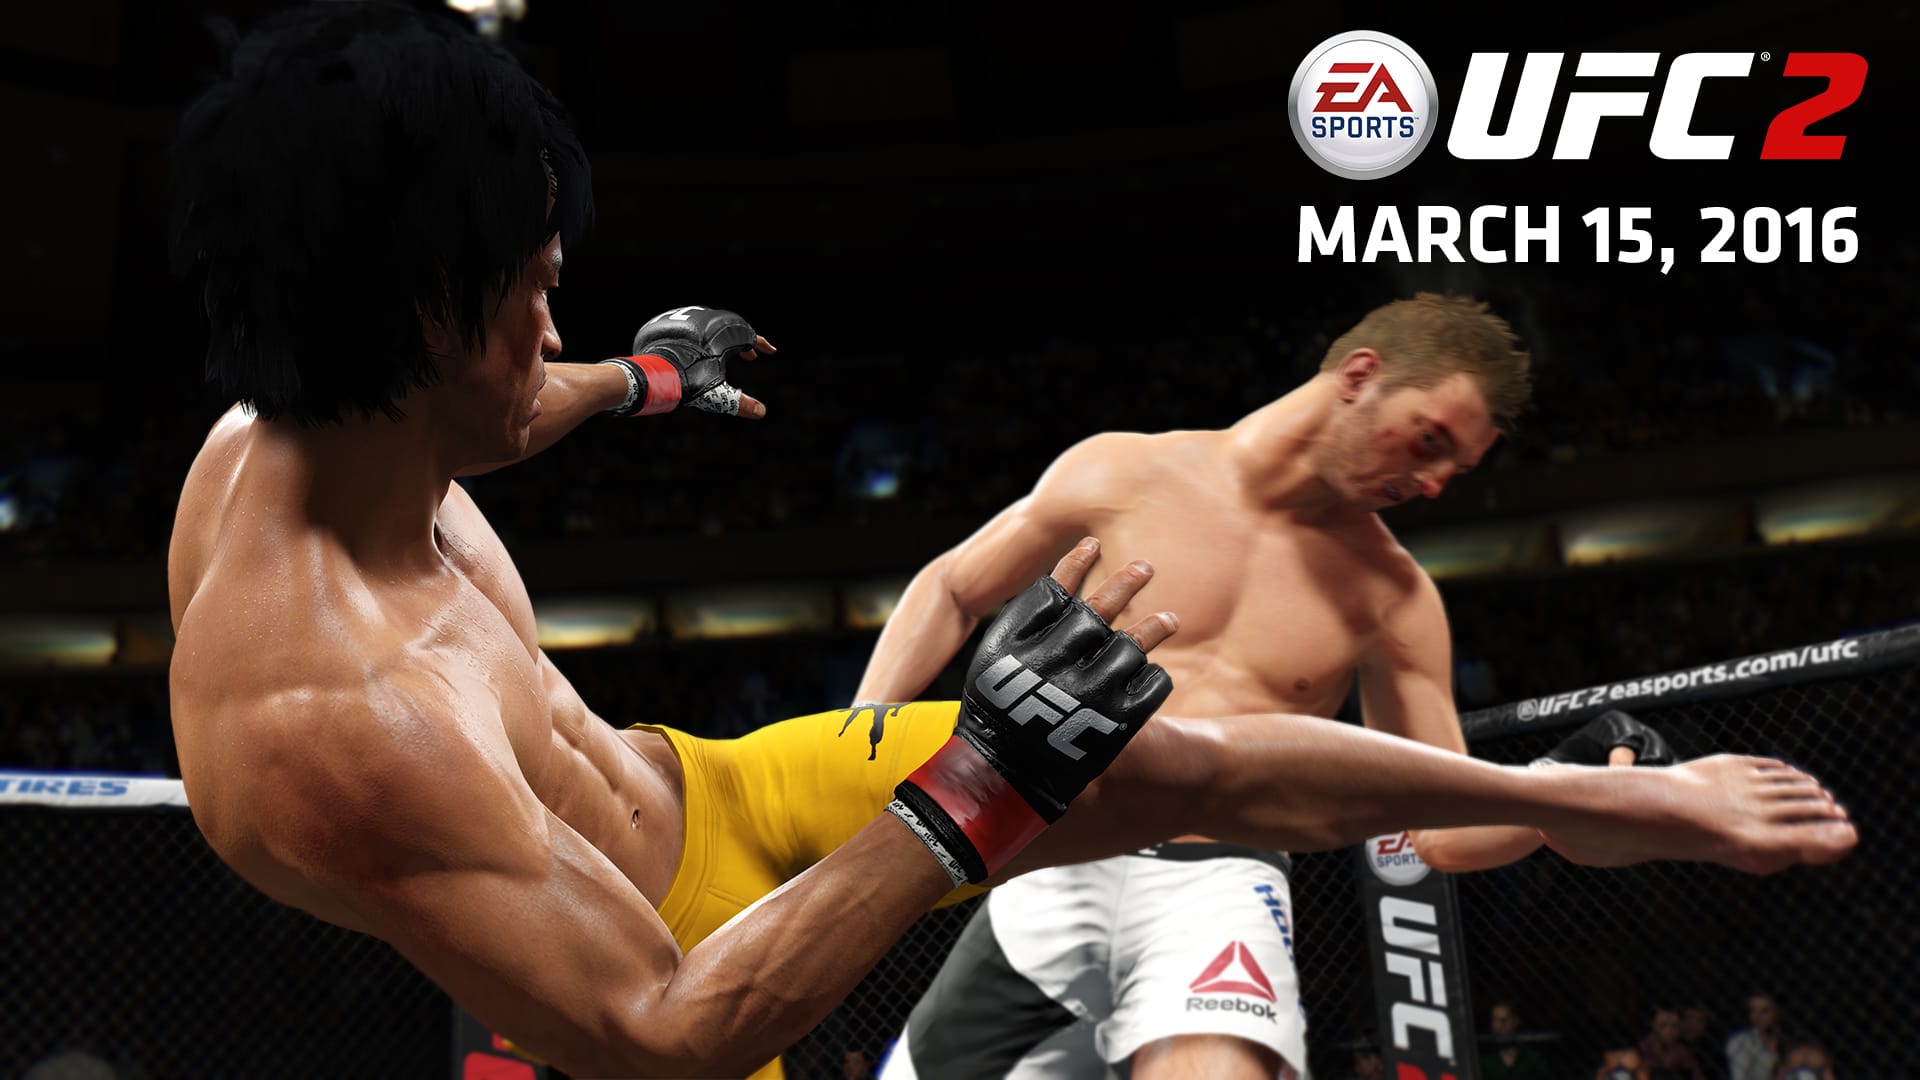 ufc 2 ps4 release date